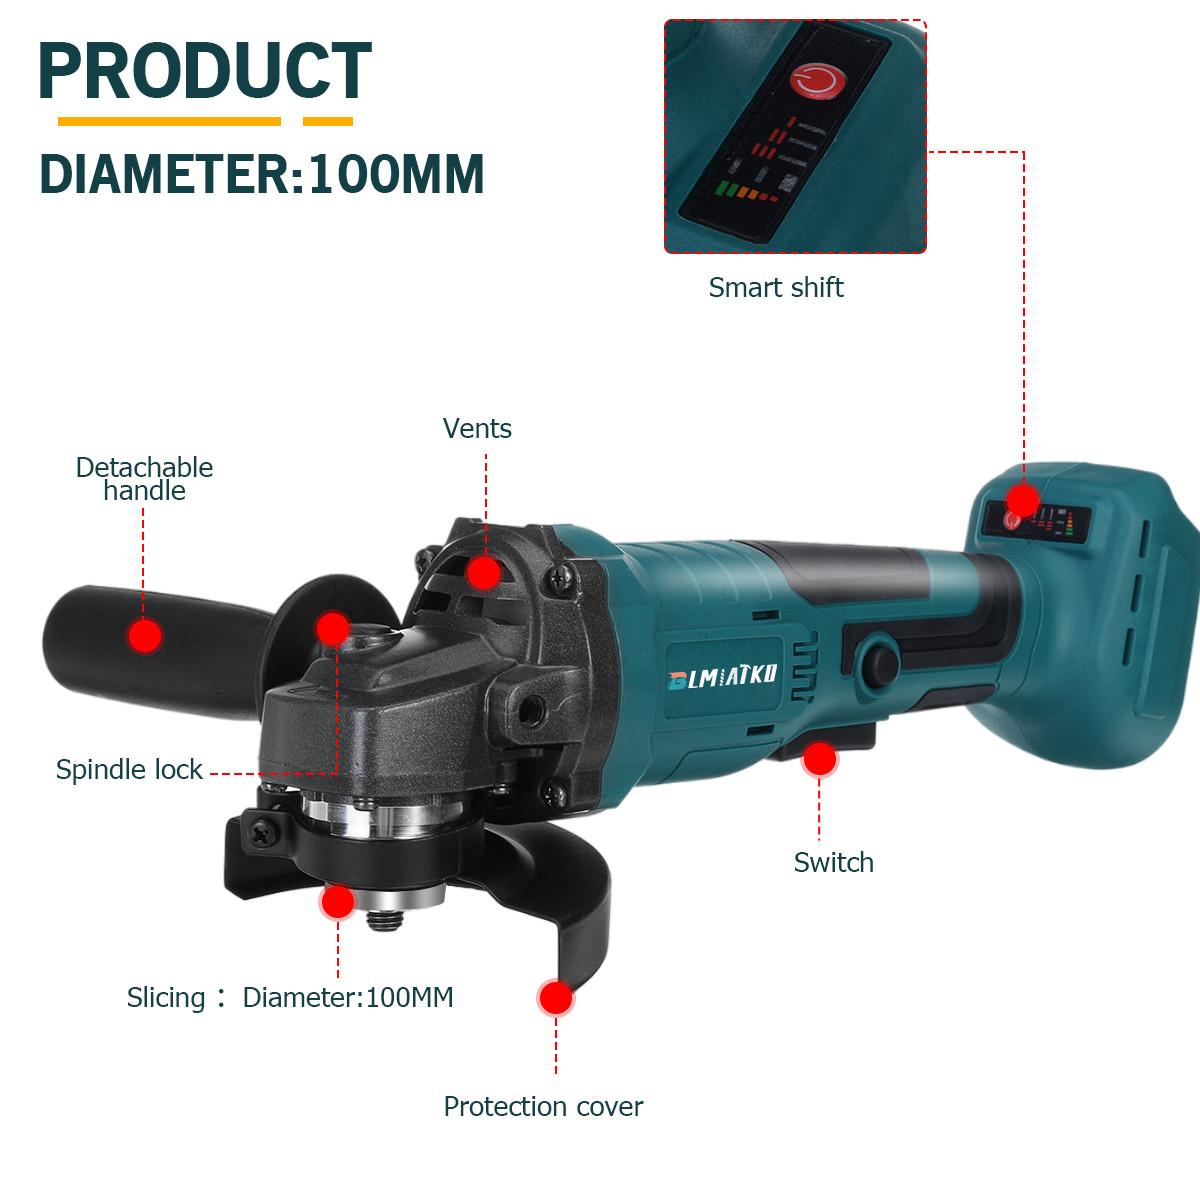 BLMIATKO-18V-800W-Lithium-Battery-Brushless-Angle-Grinder-100MM-11000RPM-Rechargeable-Polishing-Sand-1638251-5